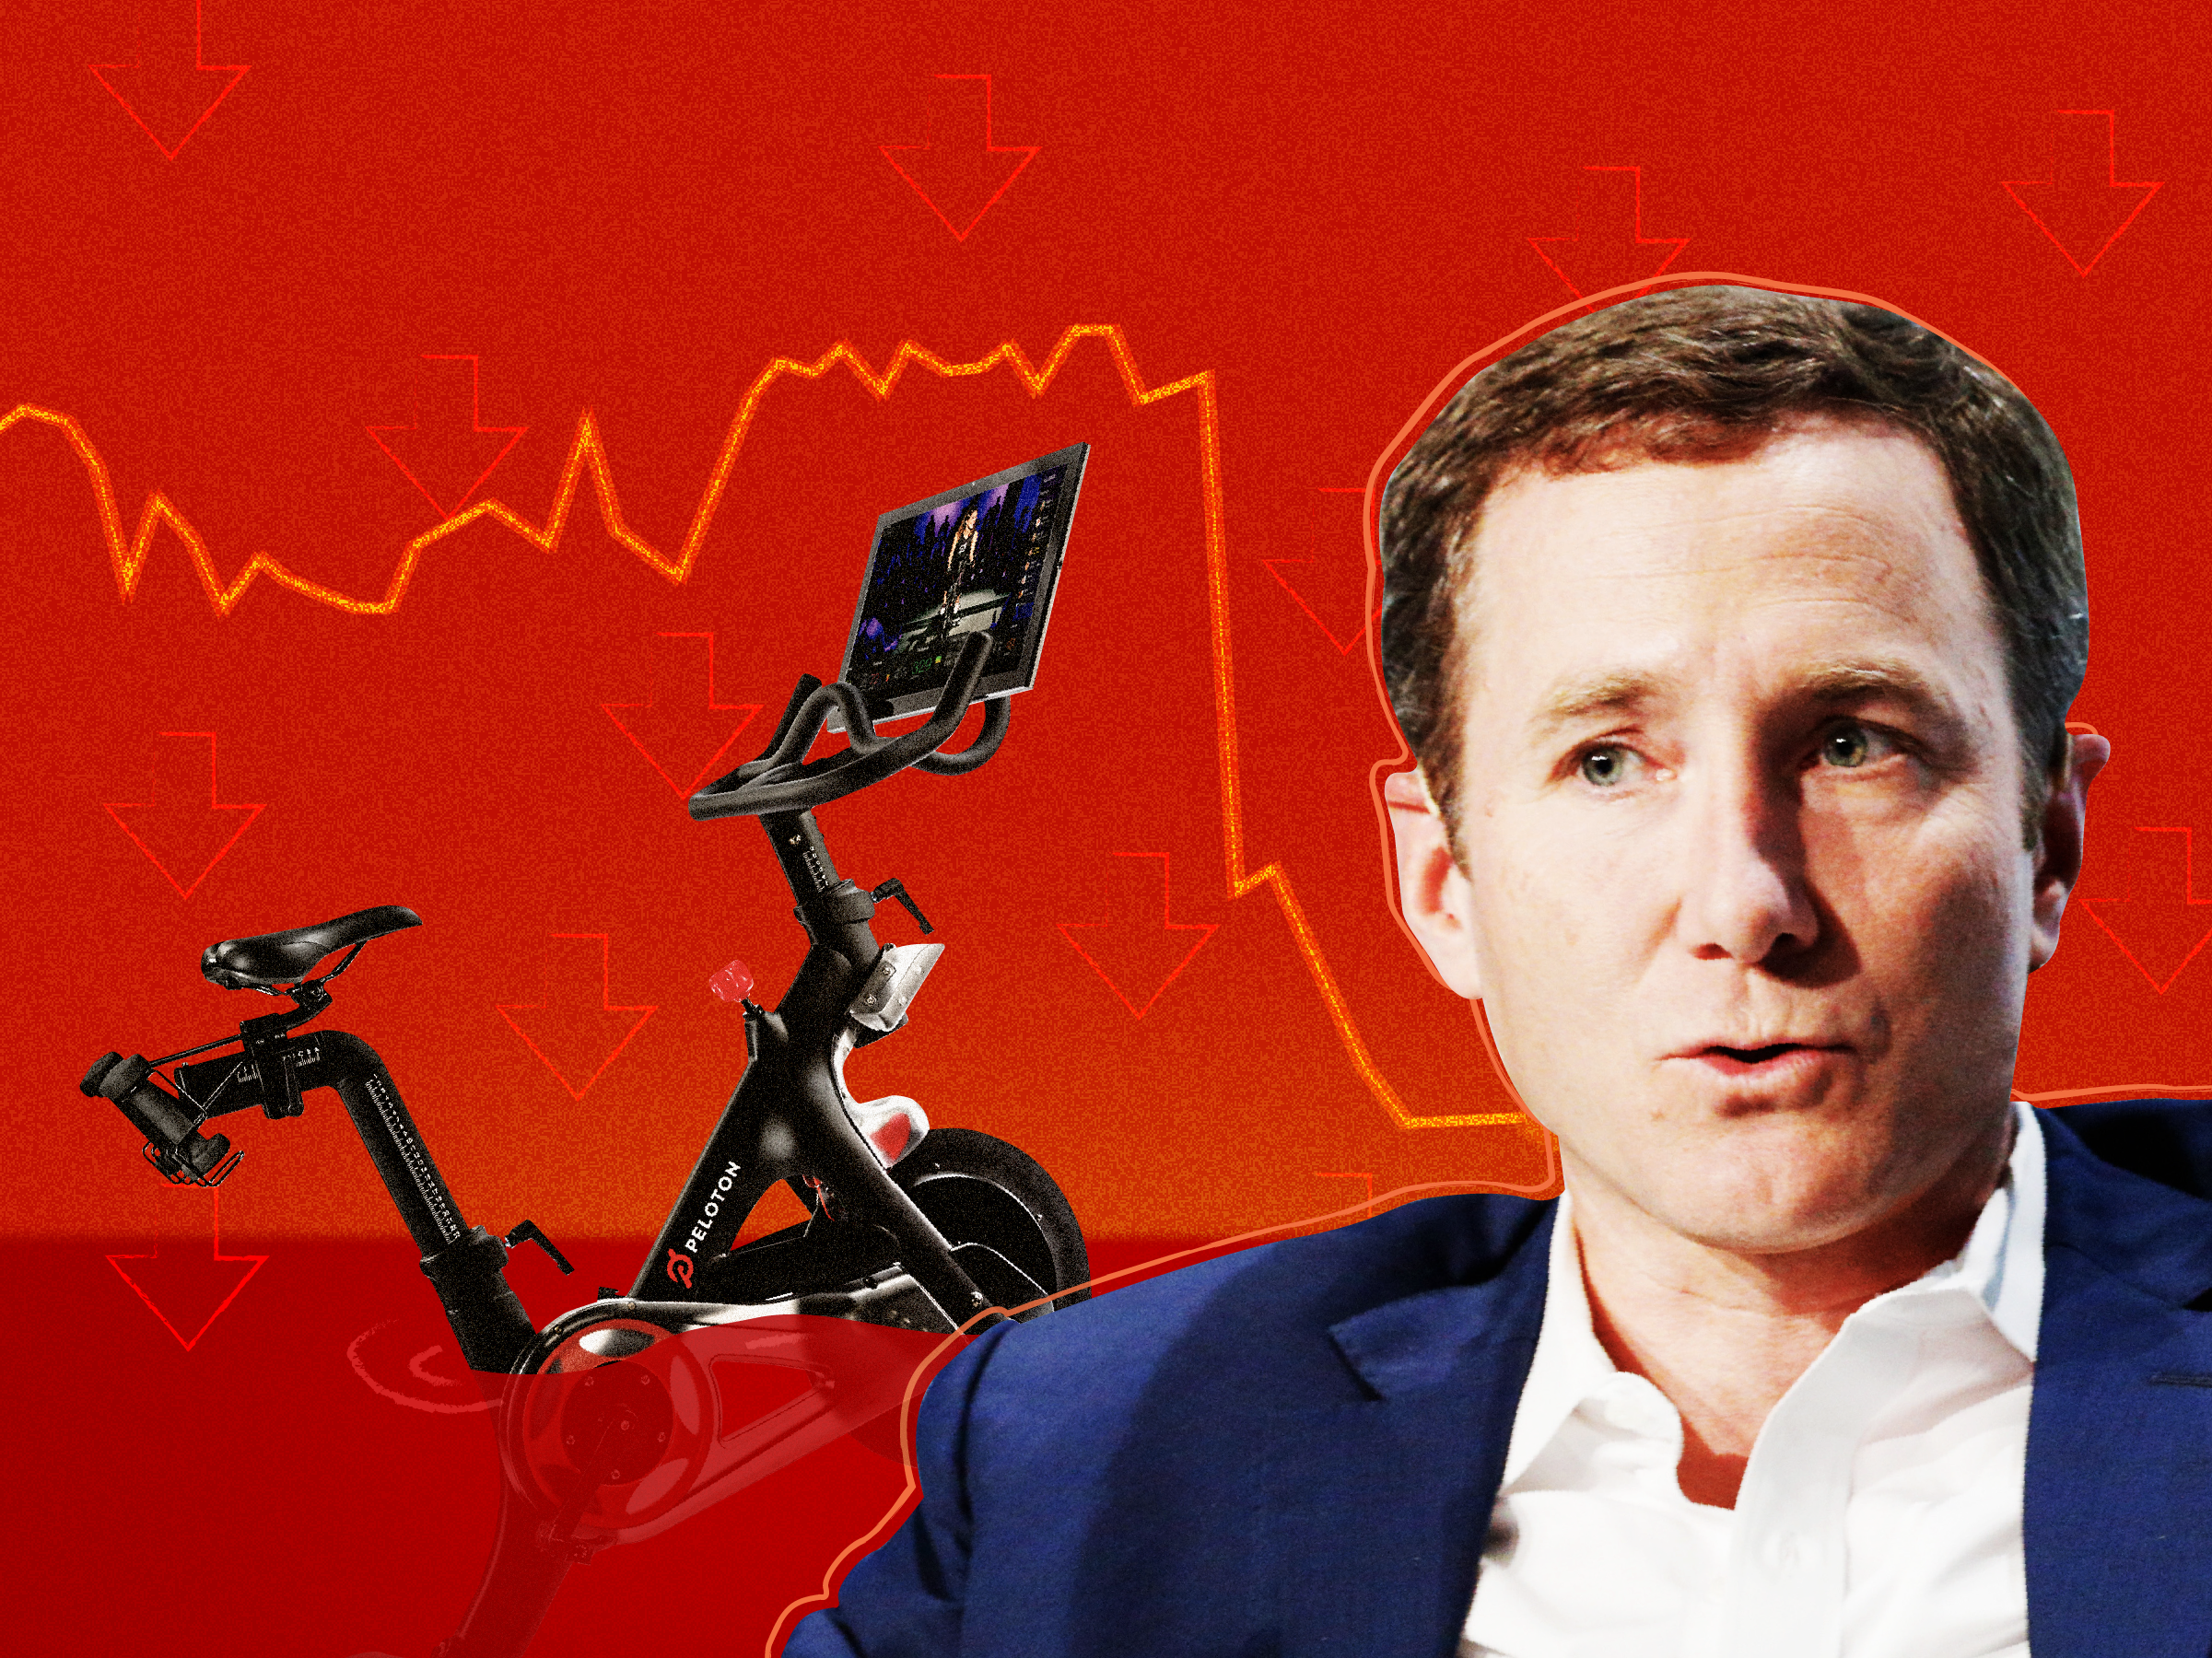 Peloton CEO John Foley next to a sinking peloton bike against red background with down arrows and the plummeting PTON stock graph